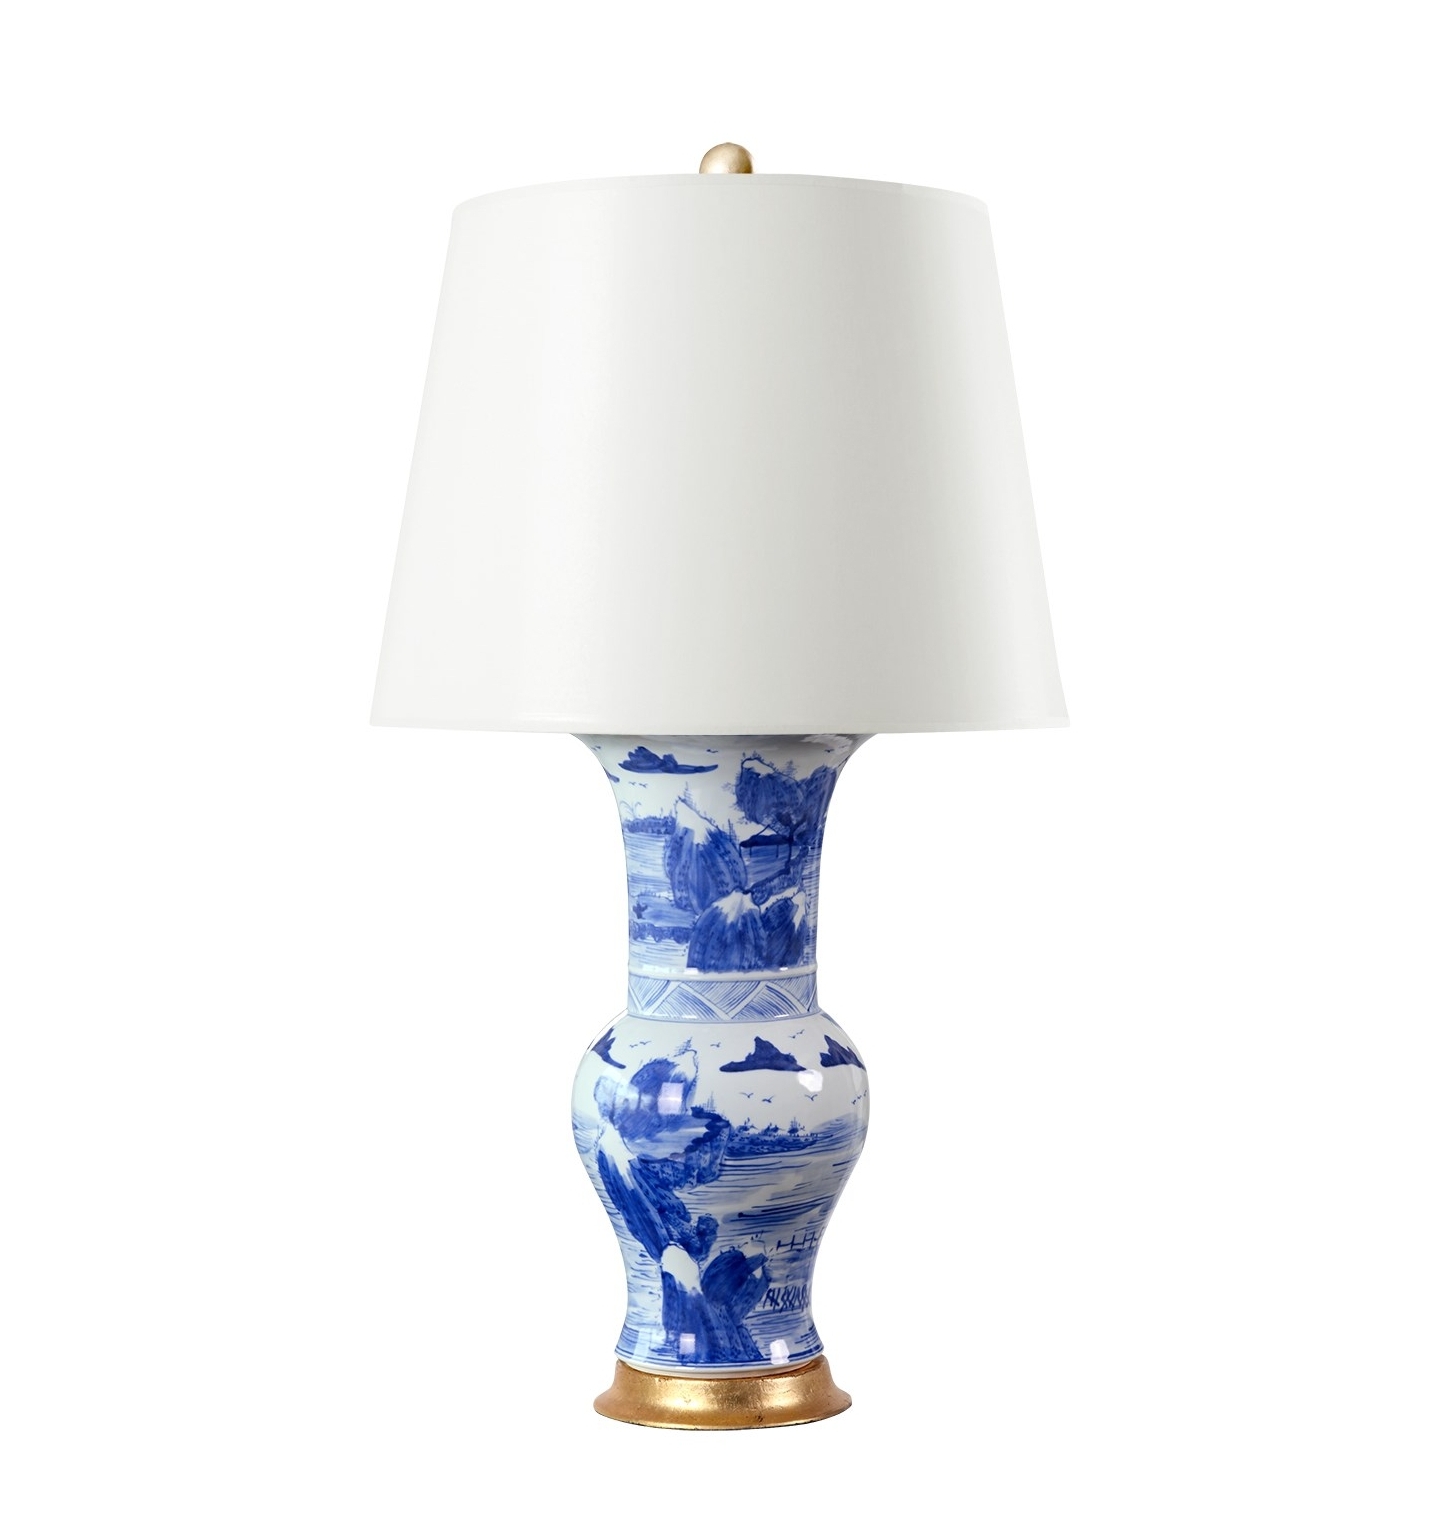 Blue White Hand Painted Porcelain Lamp, Small Blue And White Porcelain Lamp